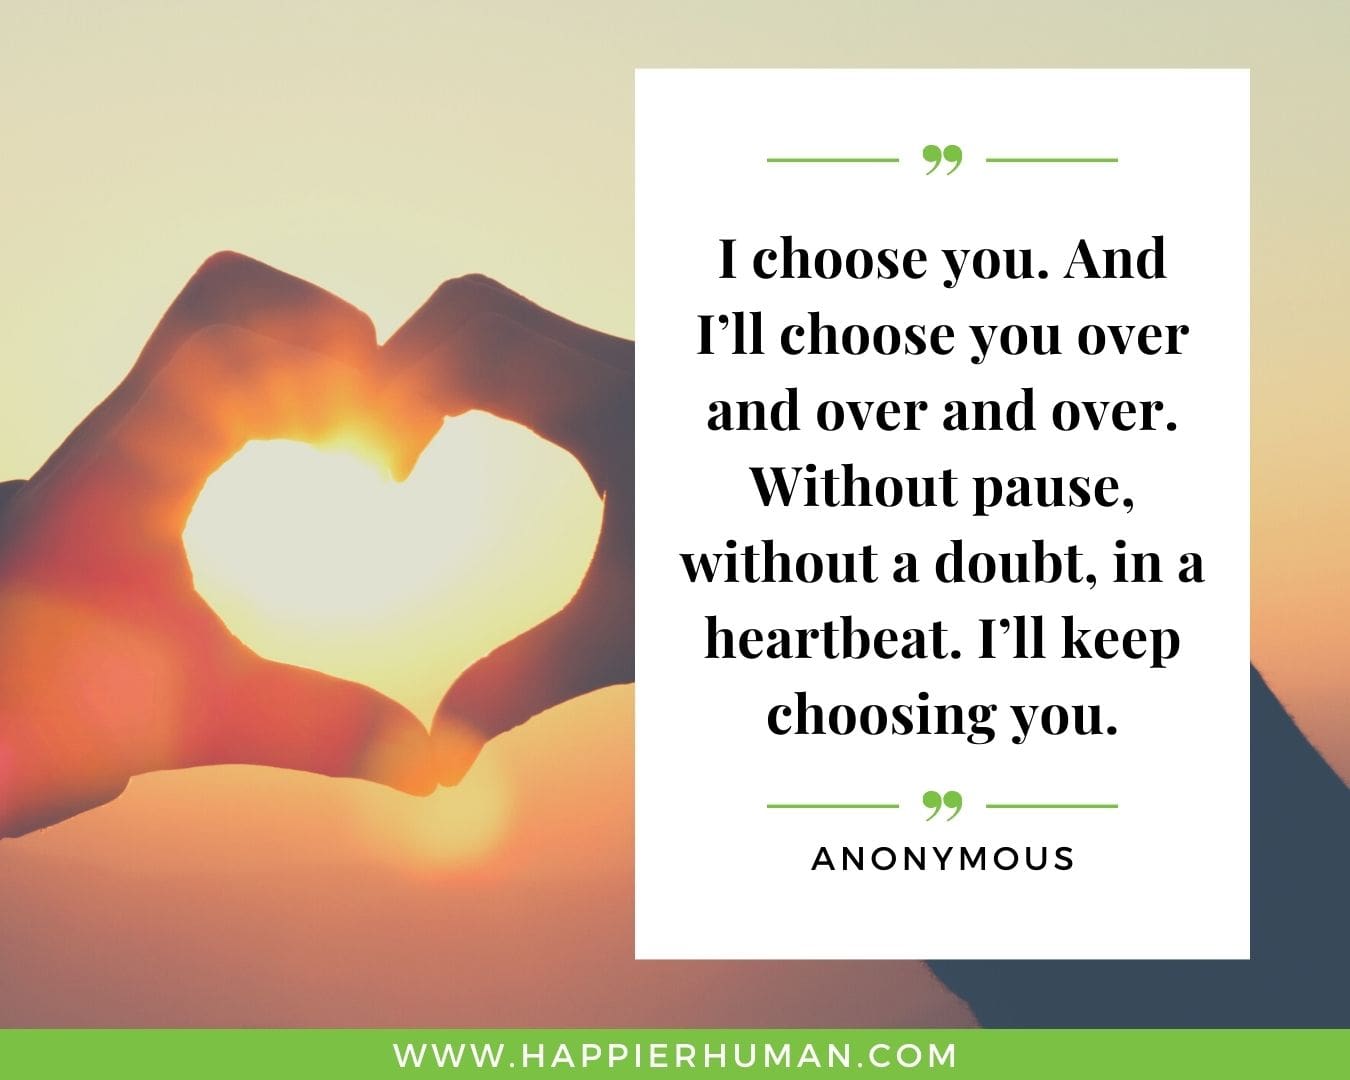 Unconditional Love Quotes for Her - “I choose you. And I’ll choose you over and over and over. Without pause, without a doubt, in a heartbeat. I’ll keep choosing you.”- Anonymous